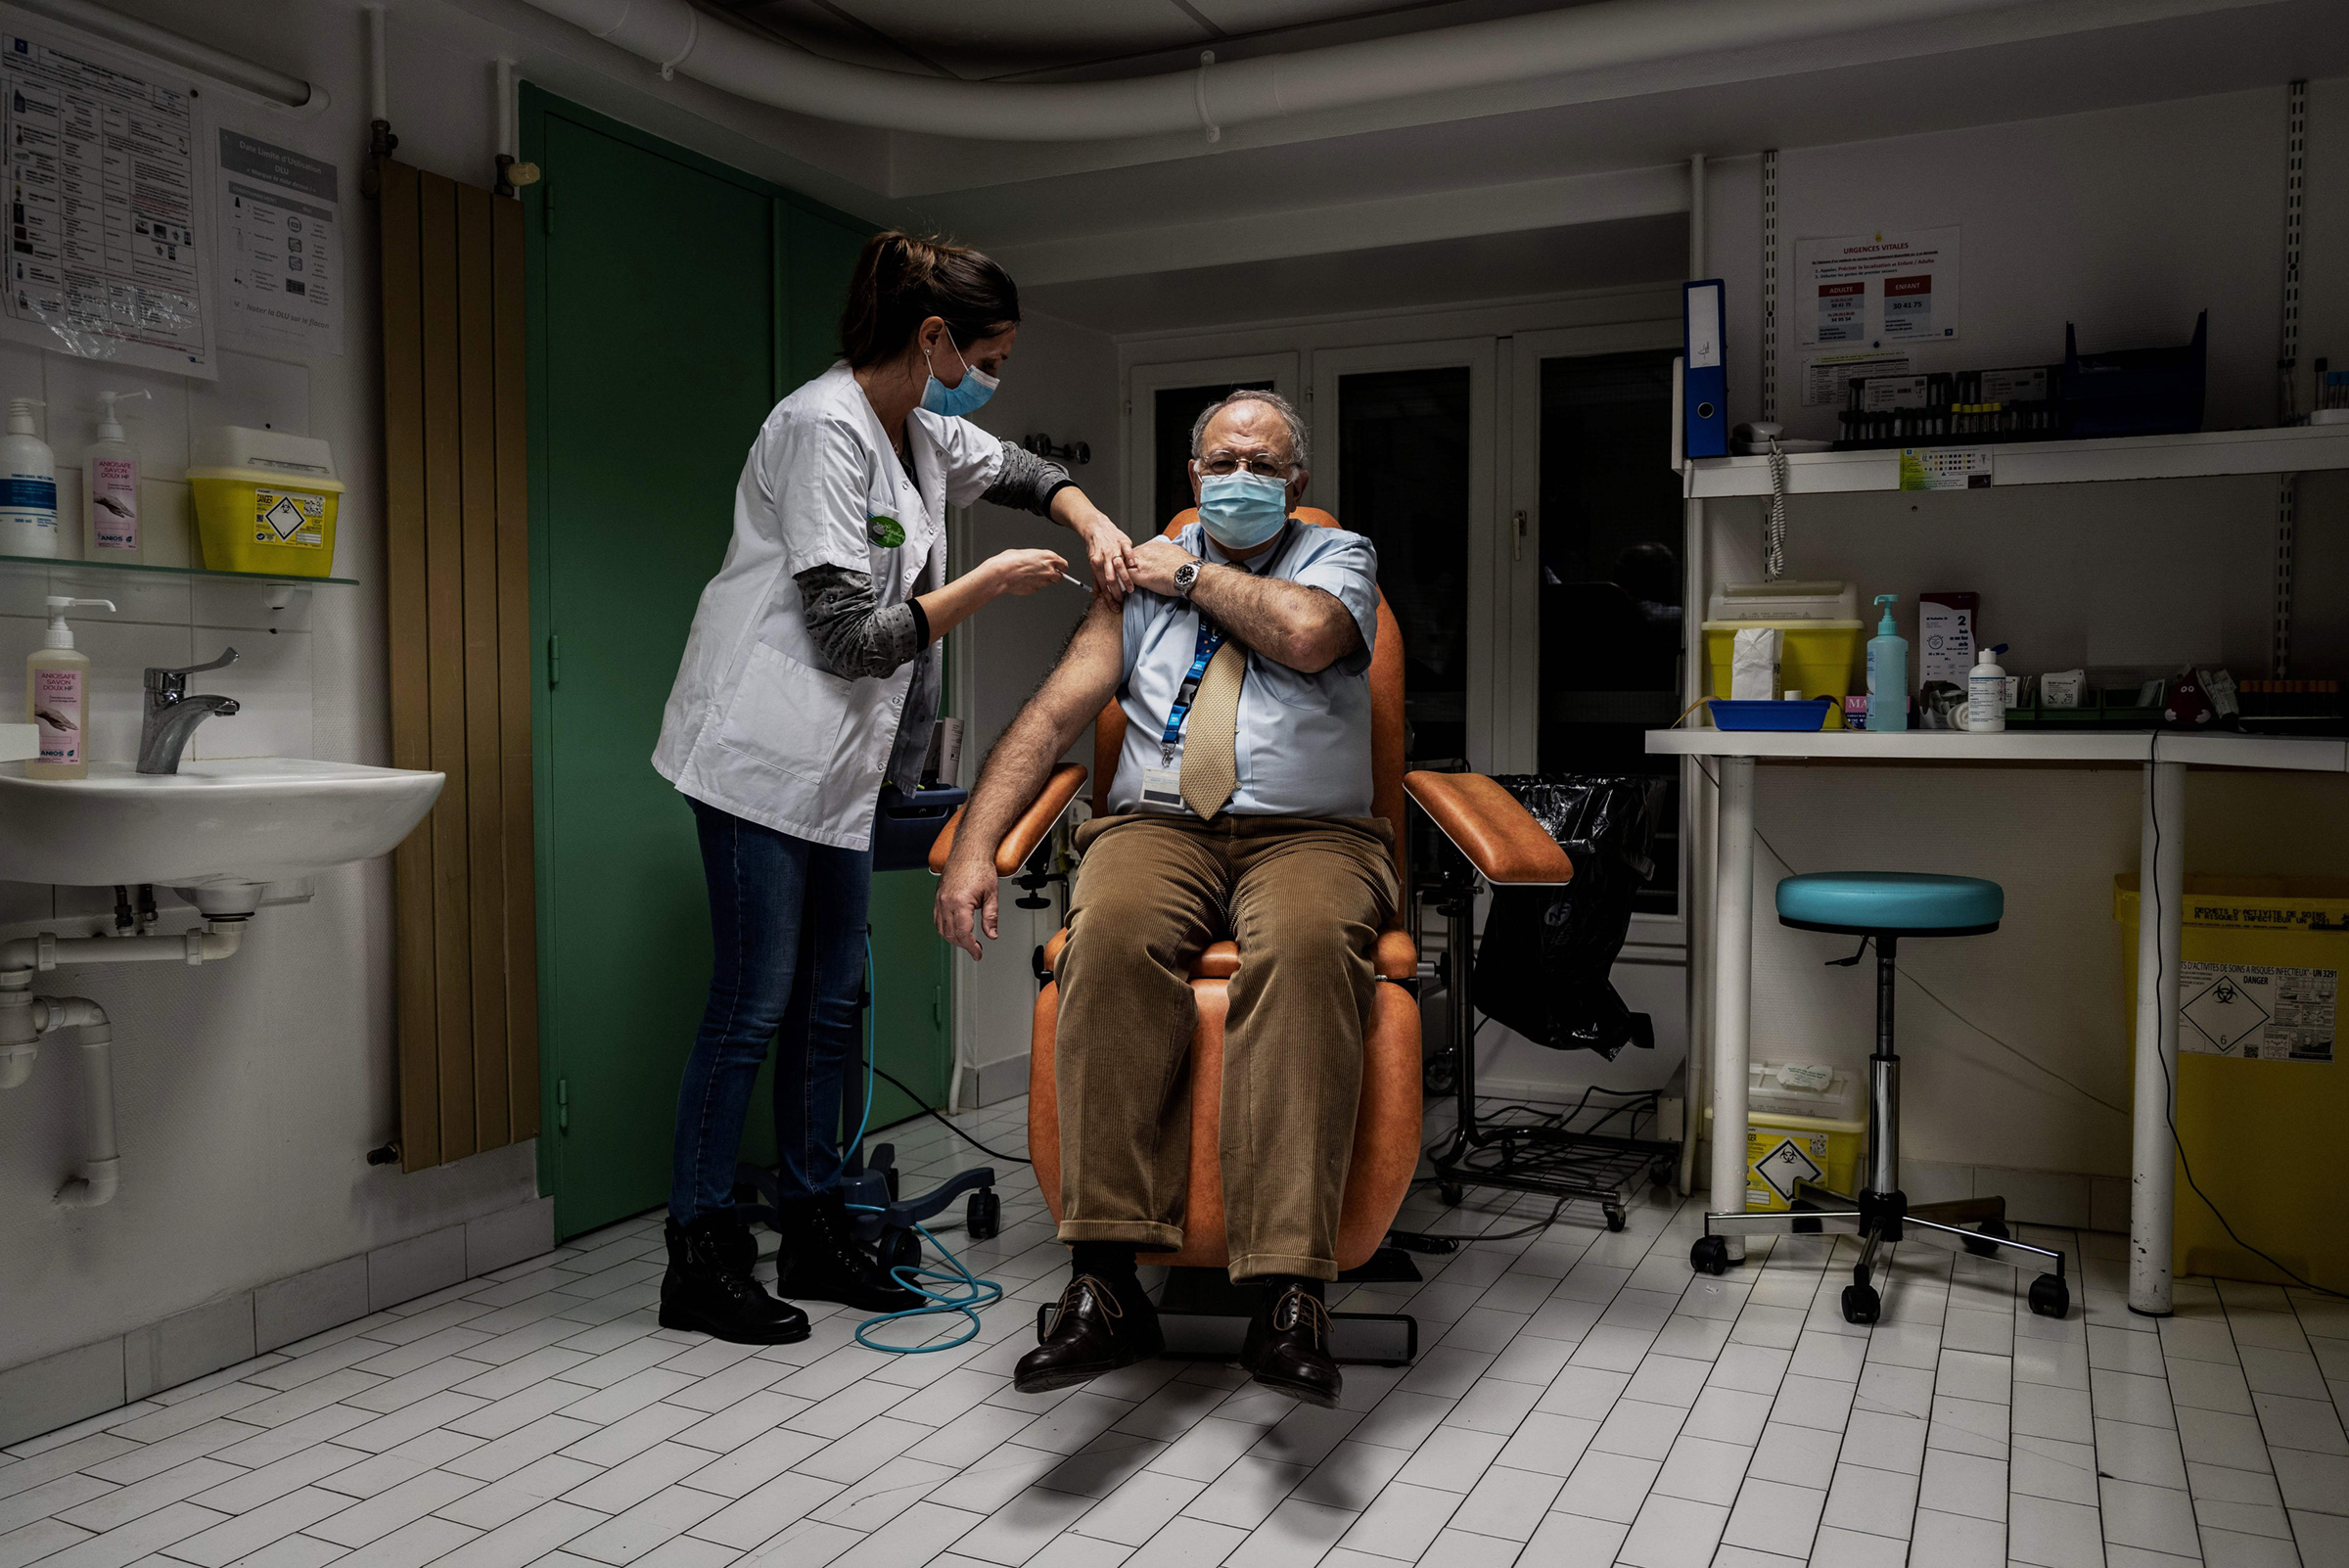 A nurse injects a dose of the Pfizer-BioNTech Covid-19 vaccine to a member of the medical staff at the Croix Rousse Hospital in Lyon, France, on Jan. 6, 2021. (Jeff Pachoud—AFP/Getty Images)